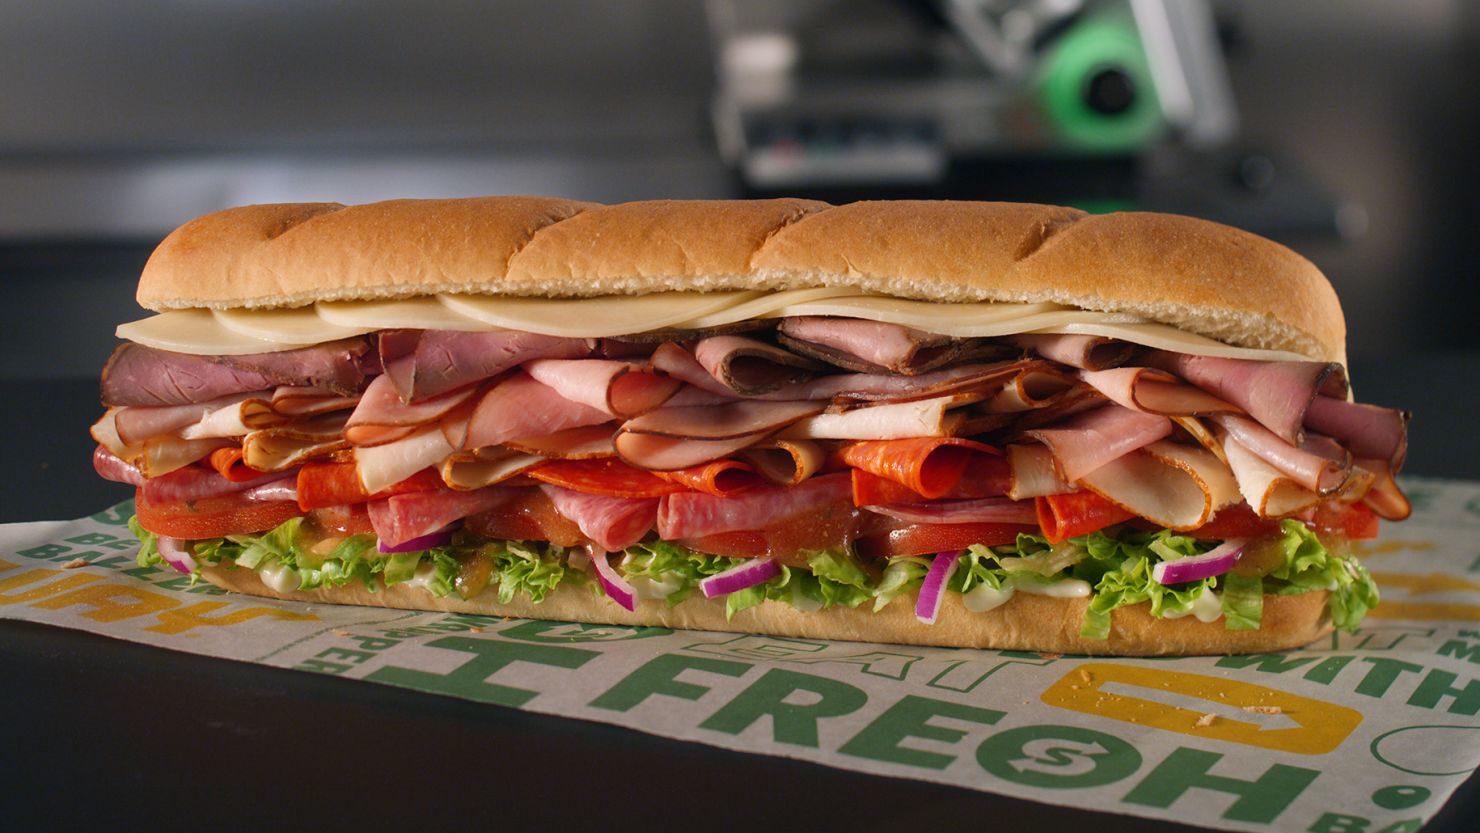 America's Largest Sandwich Chain Is Now Selling Subs Using This